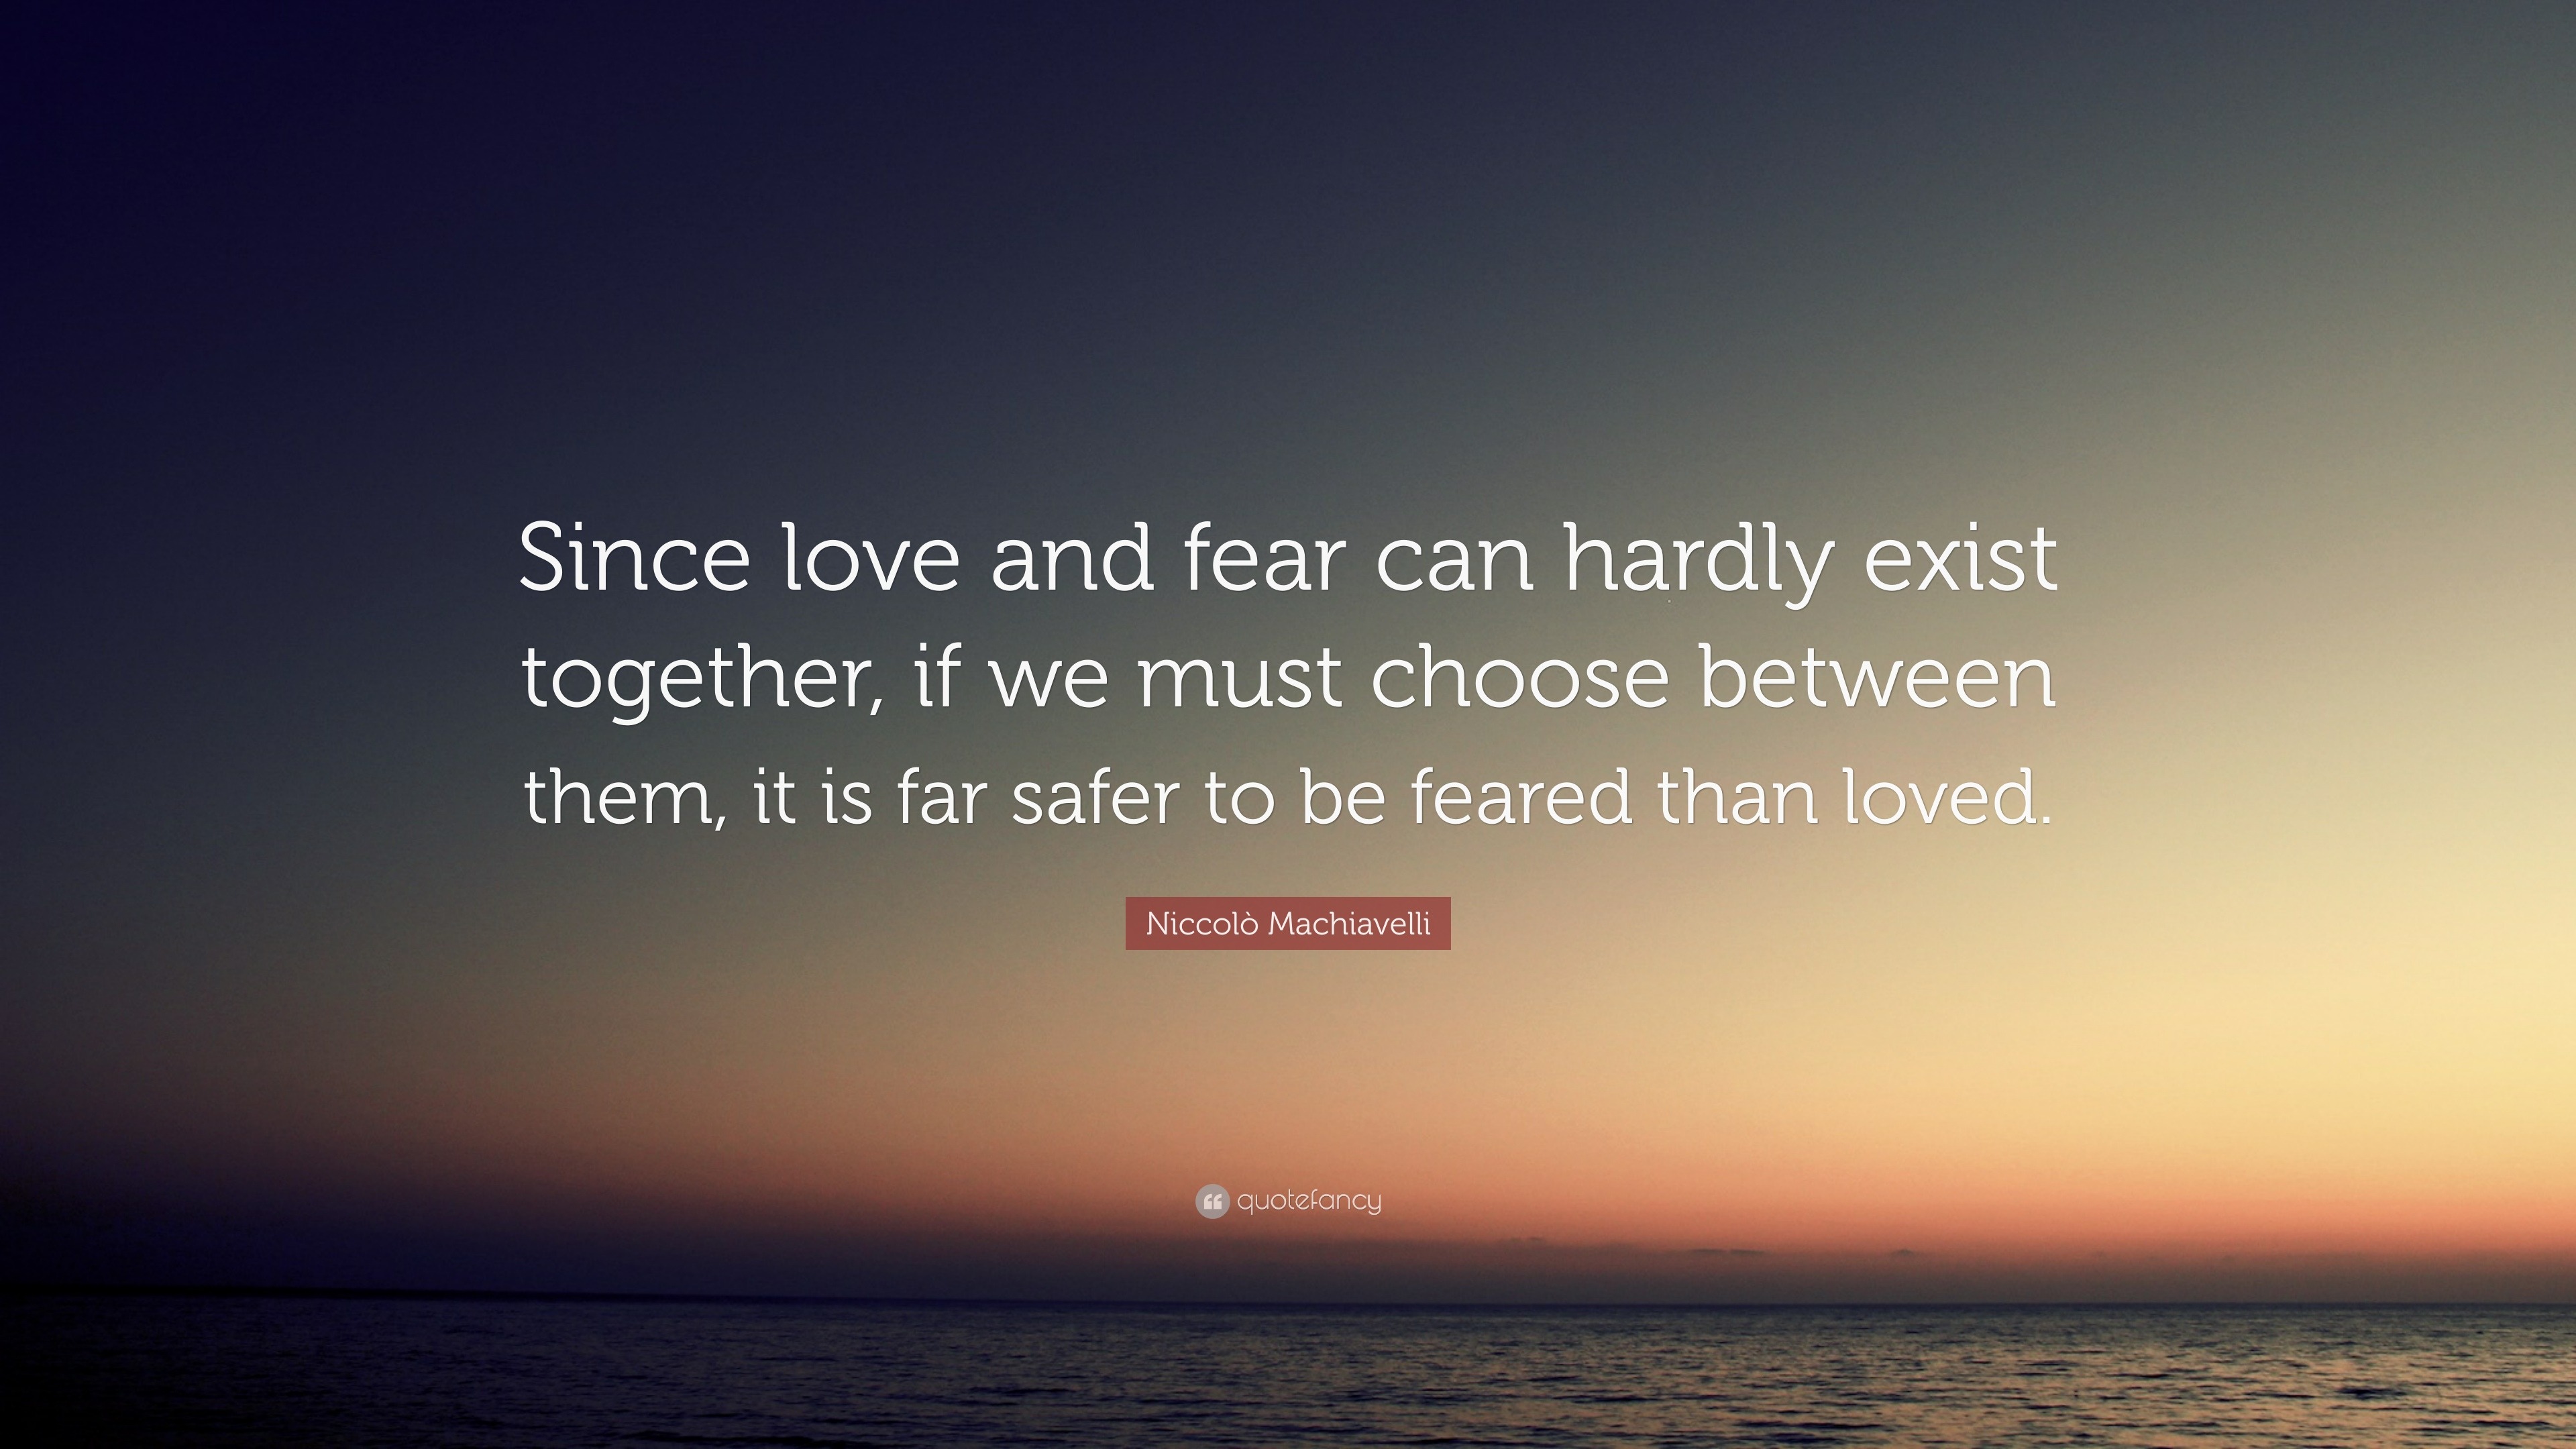 Niccolò Machiavelli Quote: “Since love and fear can hardly exist ...